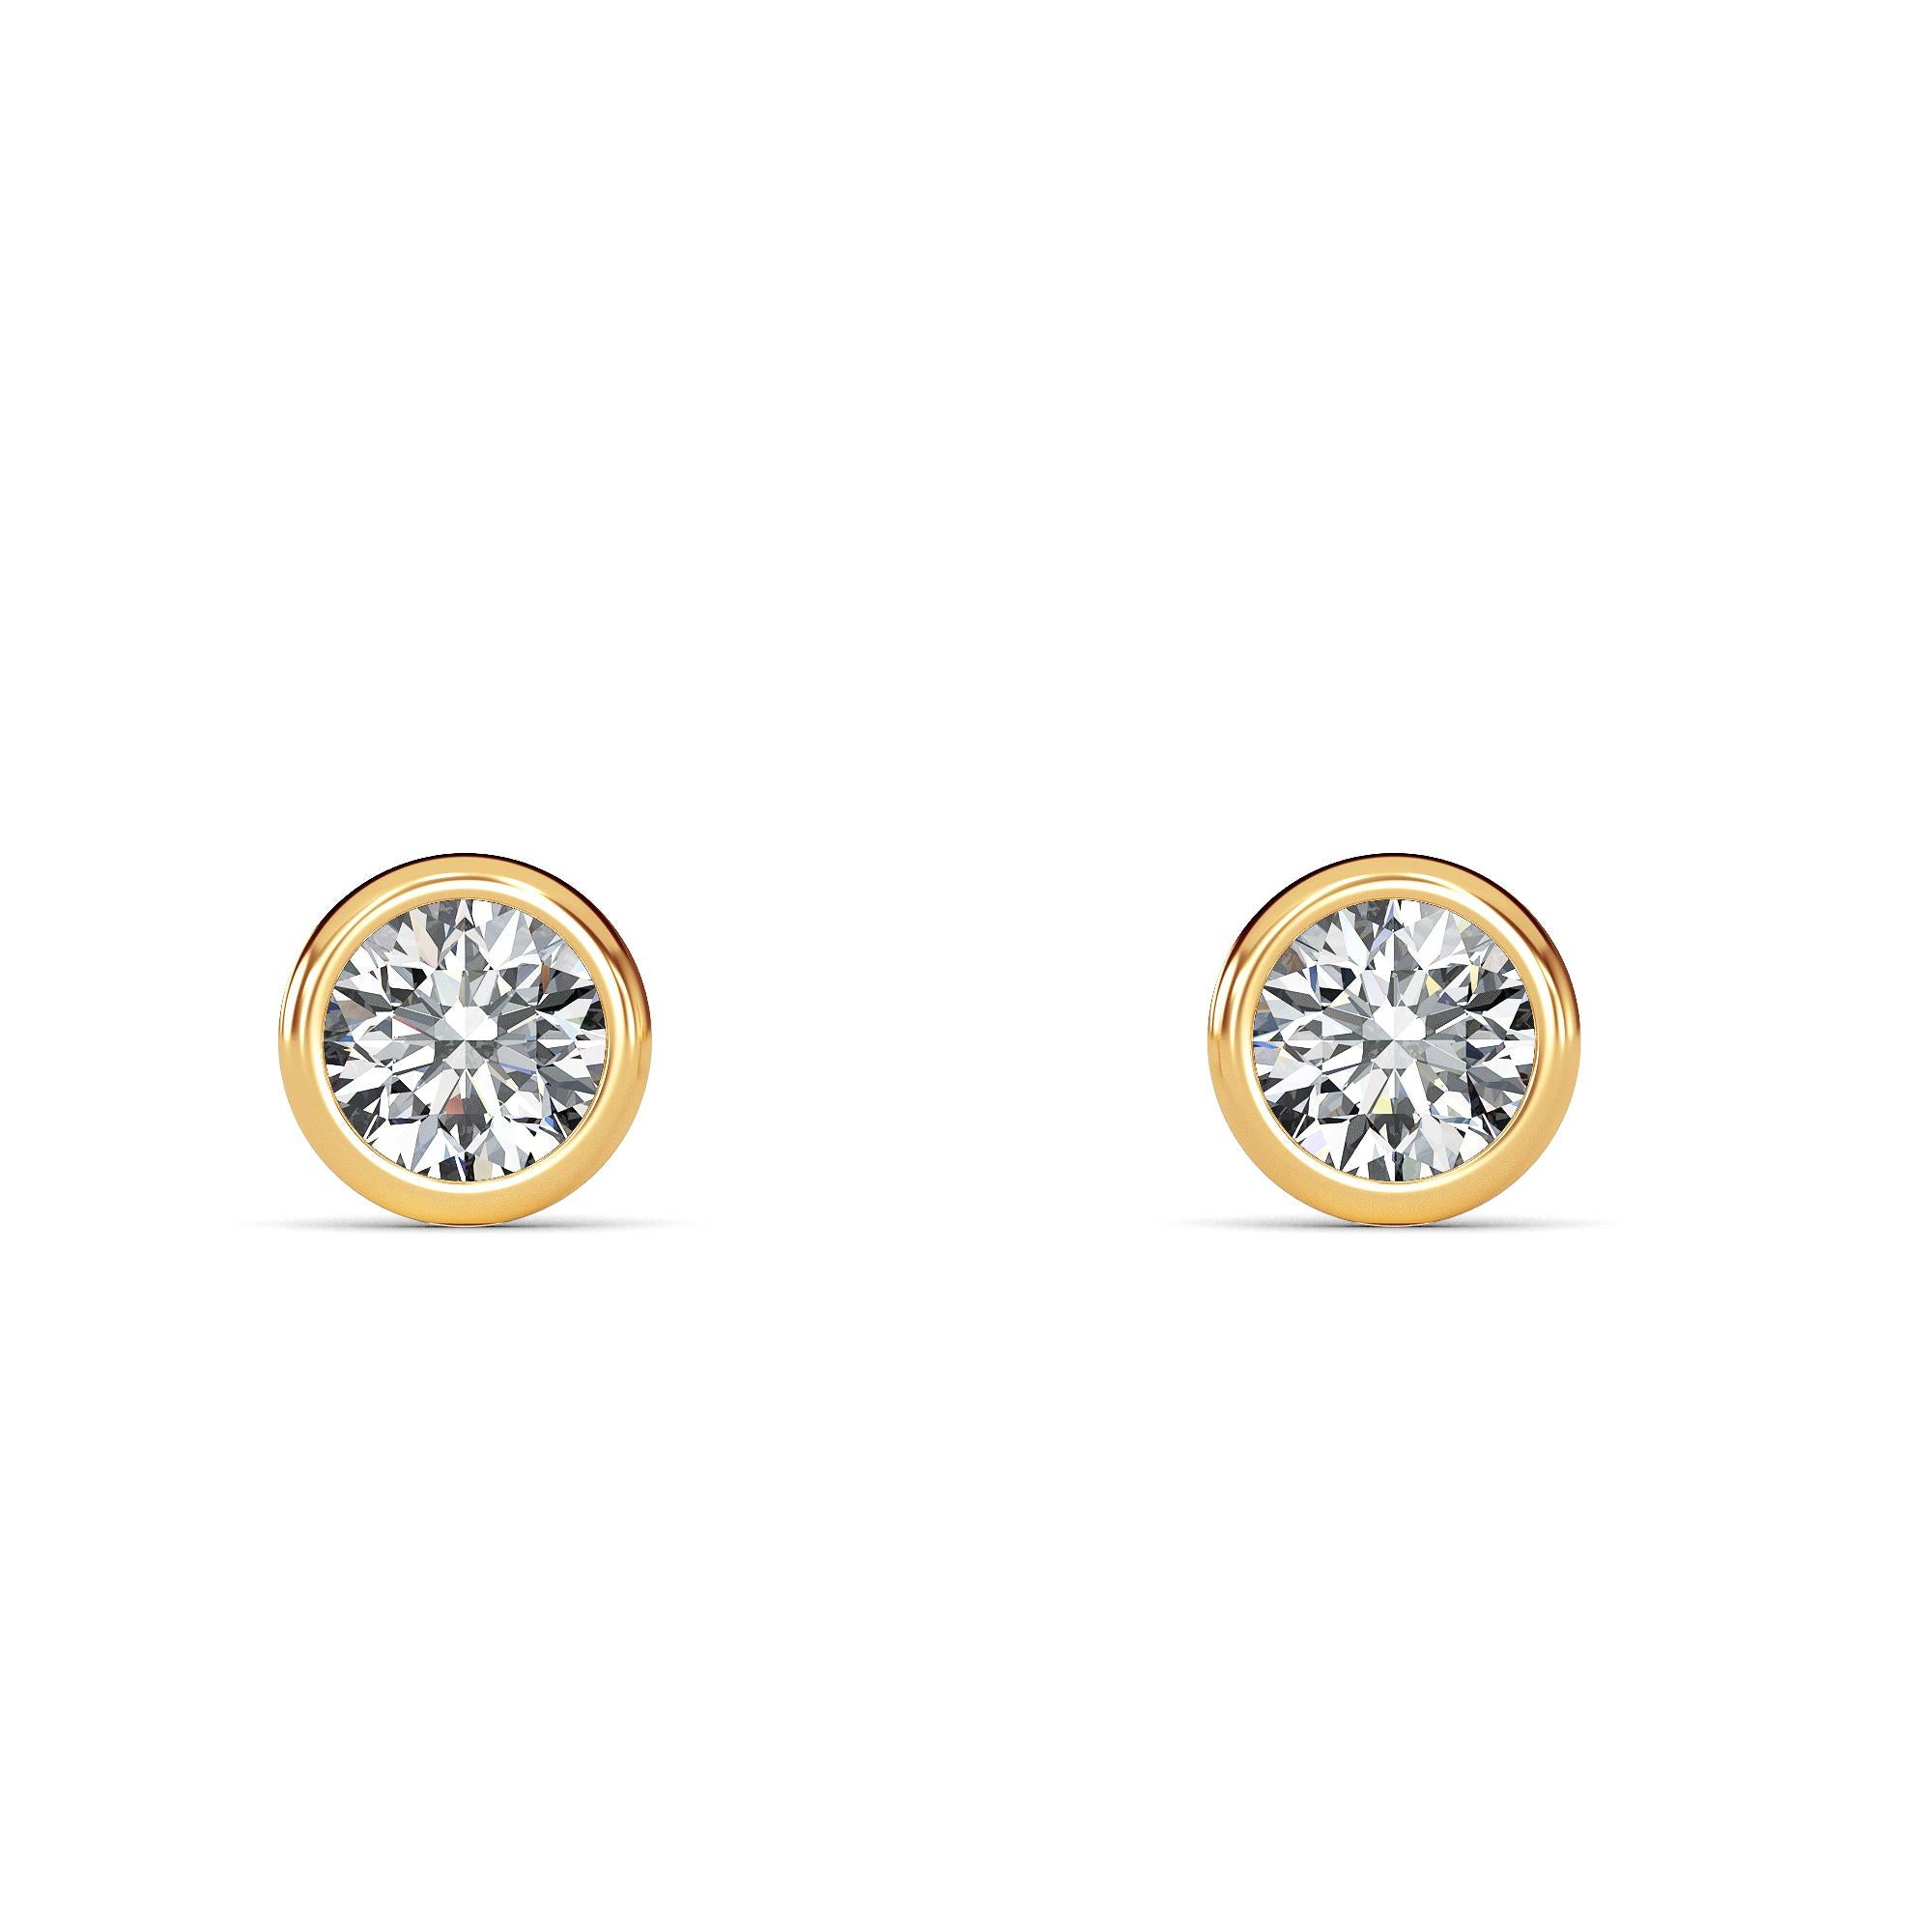 For those who value timeless elegance, these gold bezel earring settings are a must-have. The understated design pairs perfectly with any round diamond of your choice, allowing you to create a personalized and sophisticated look that will never go